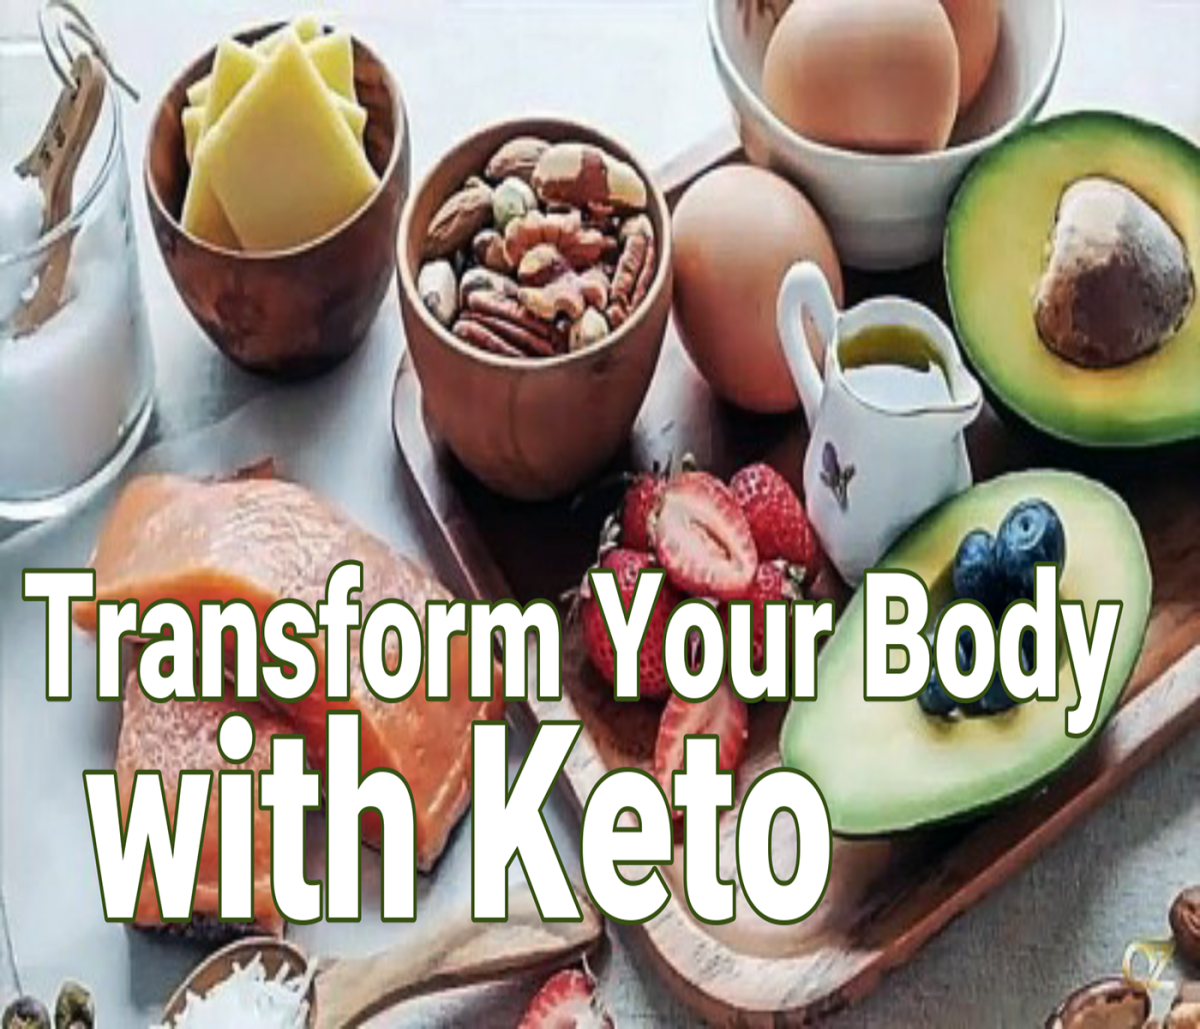 Transform Your Body with Keto